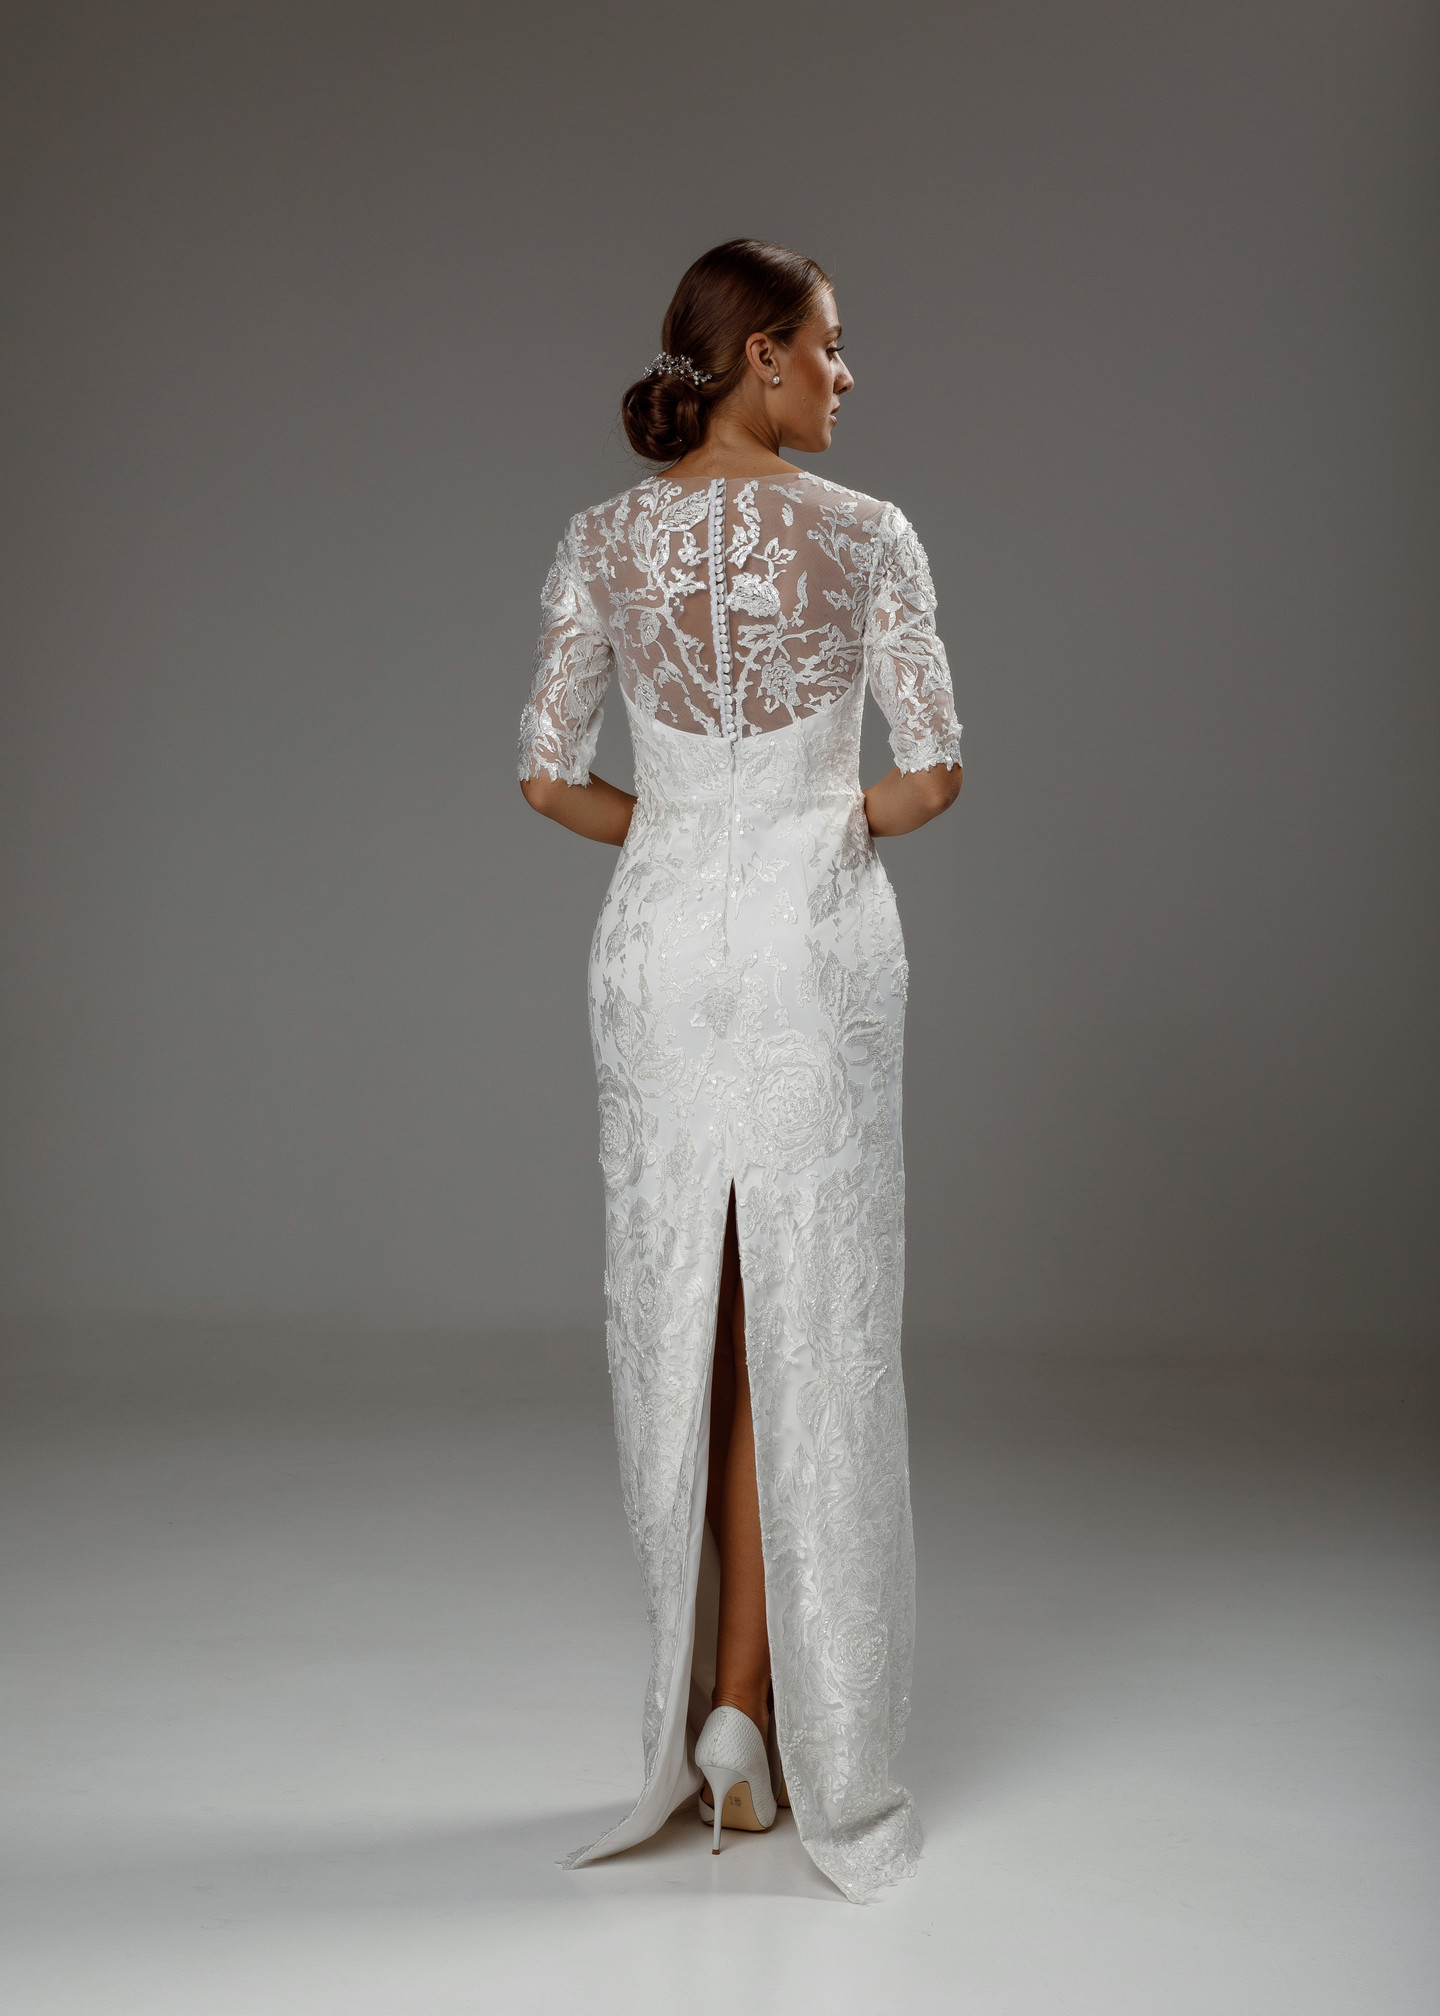 Isabelle gown, 2020, couture, dress, bridal, off-white, lace, detachable skirt, embroidery, sheath silhouette, sleeves, A-line, archive